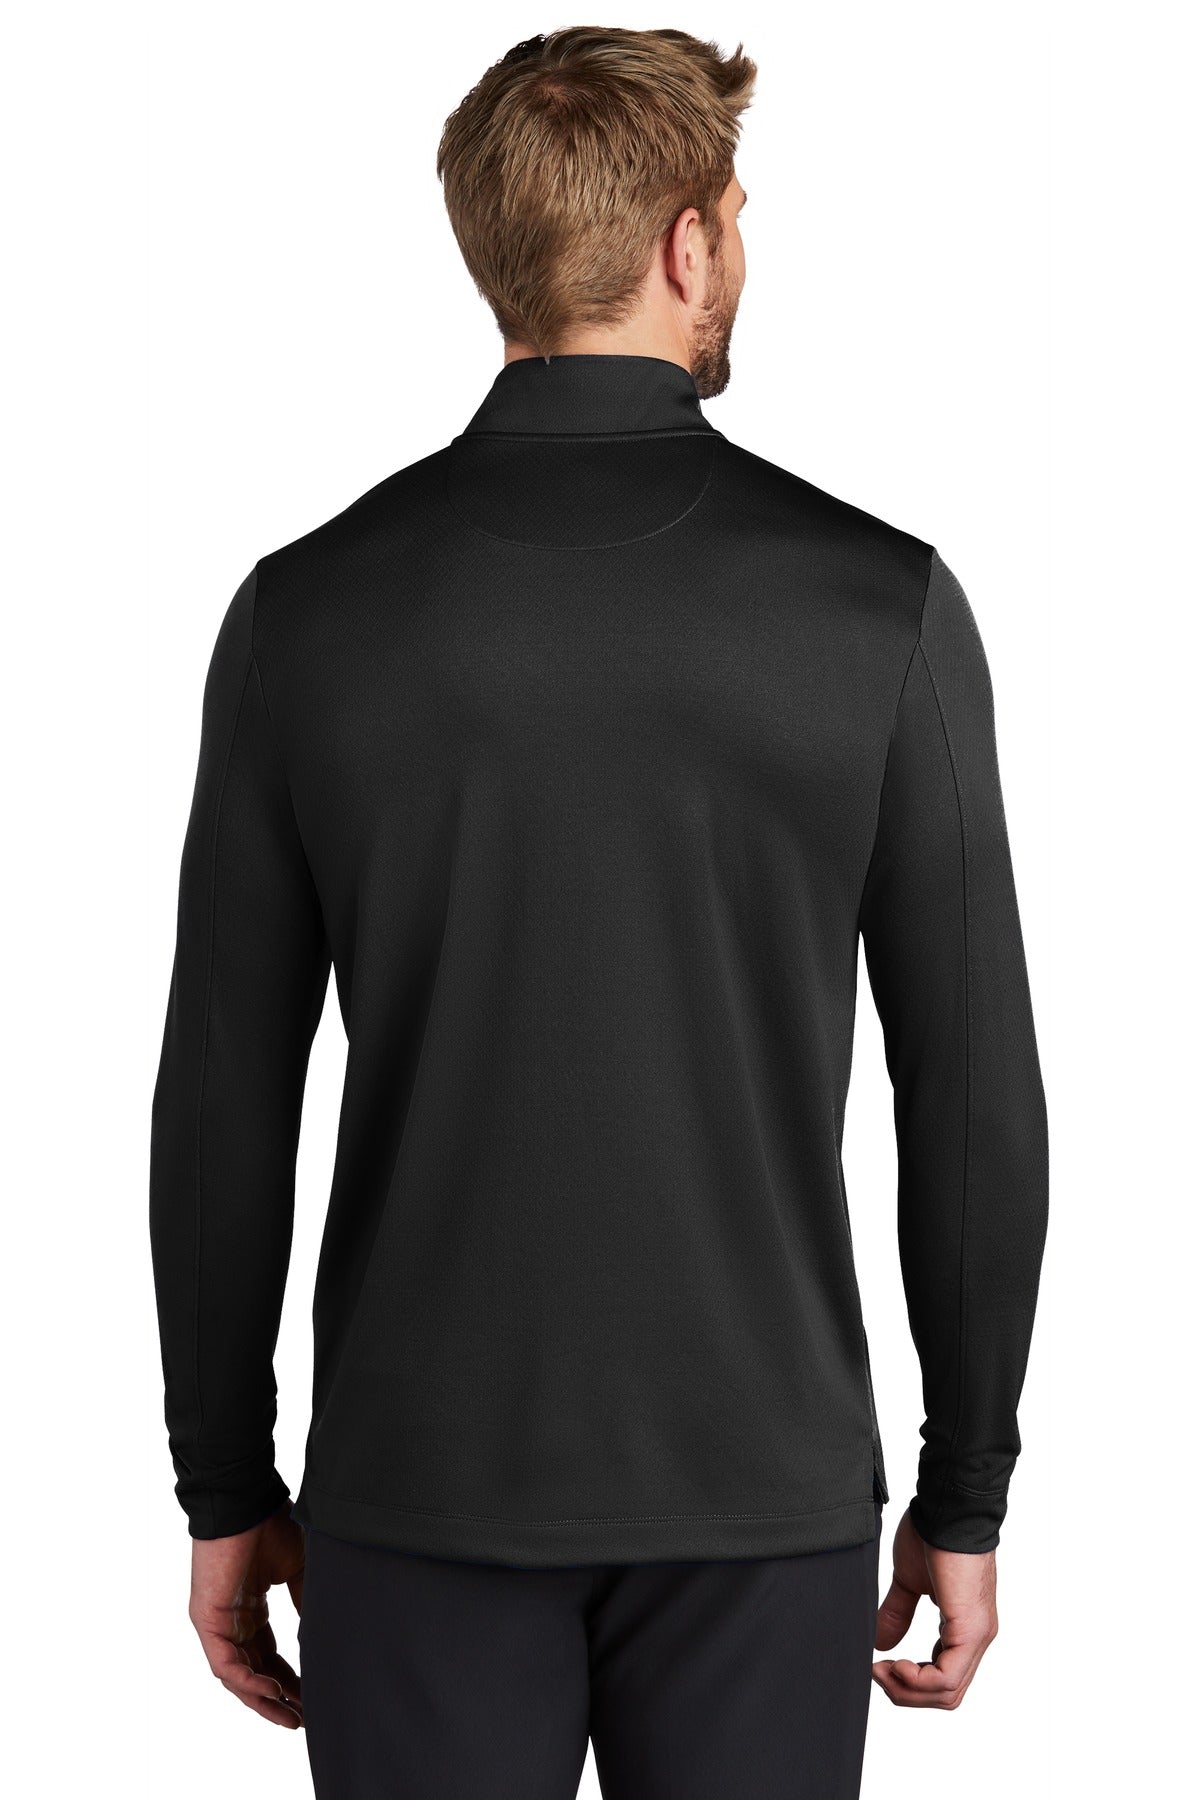 Nike Dry 1/2-Zip Cover-Up NKBV6044 - DFW Impression